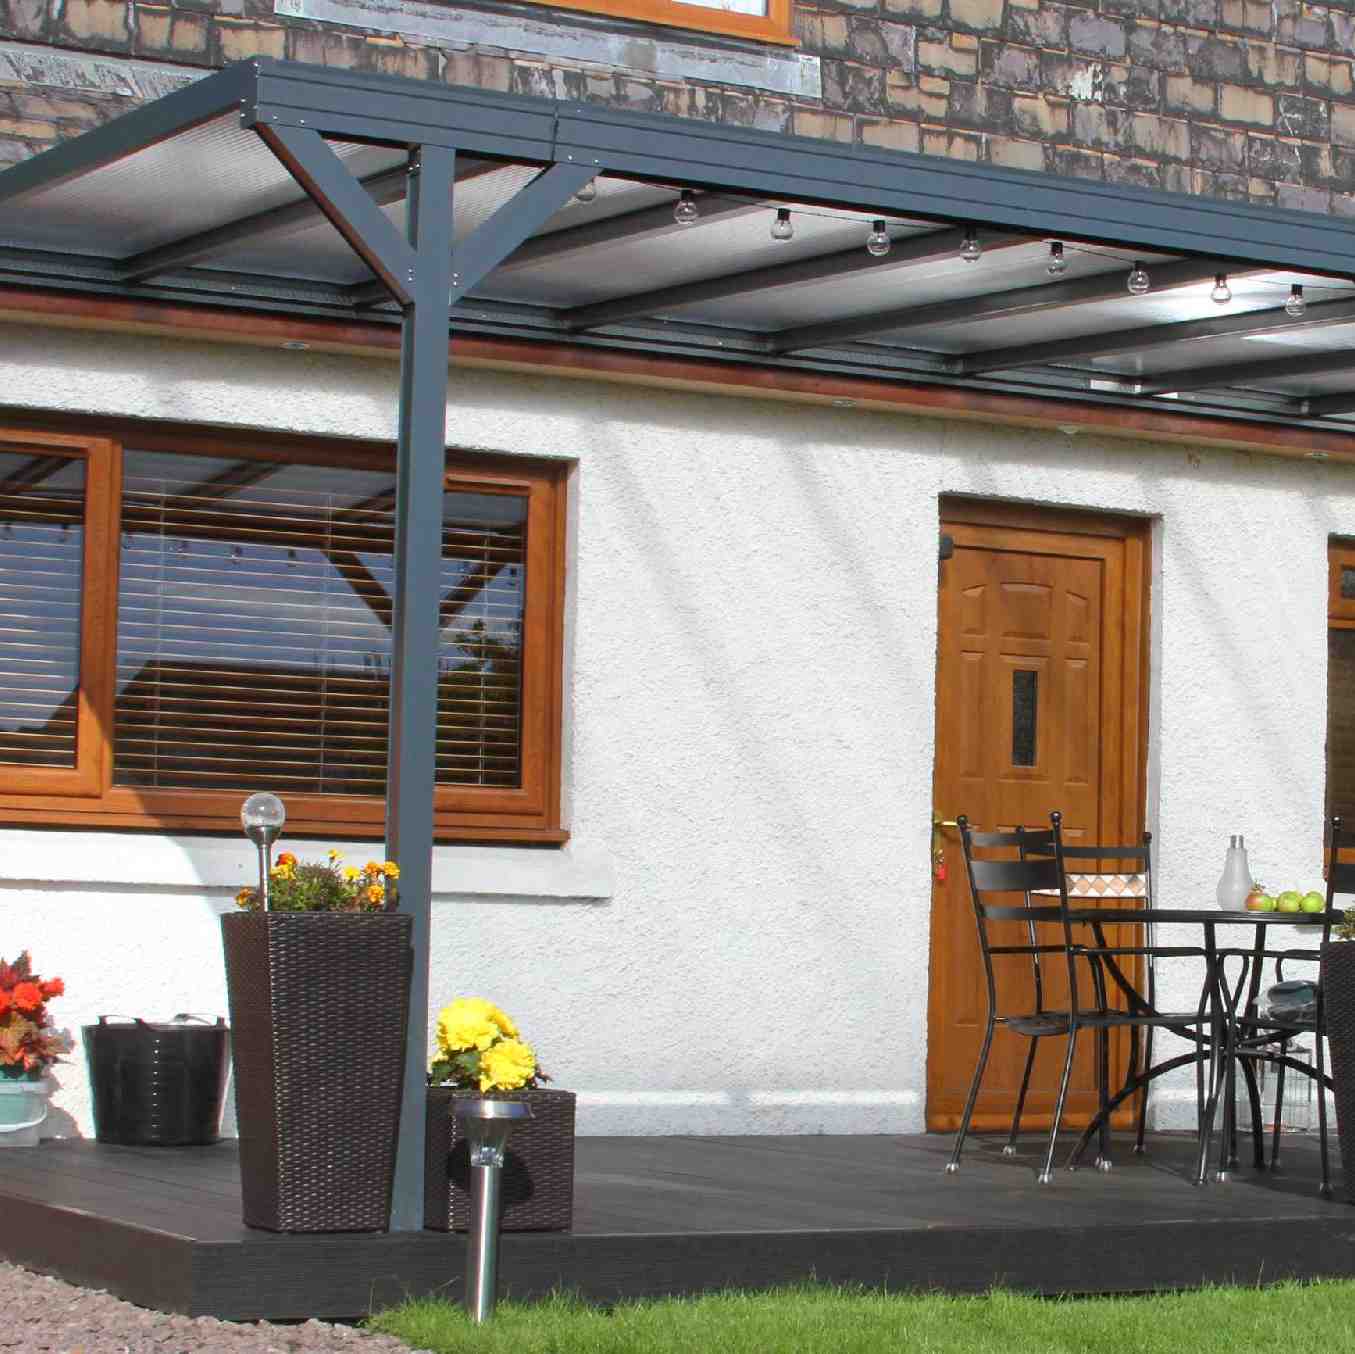 Omega Verandah, Anthracite Grey, 6mm Glass Clear Plate Polycarbonate Glazing - 7.0m (W) x 3.5m (P), (4) Supporting Posts